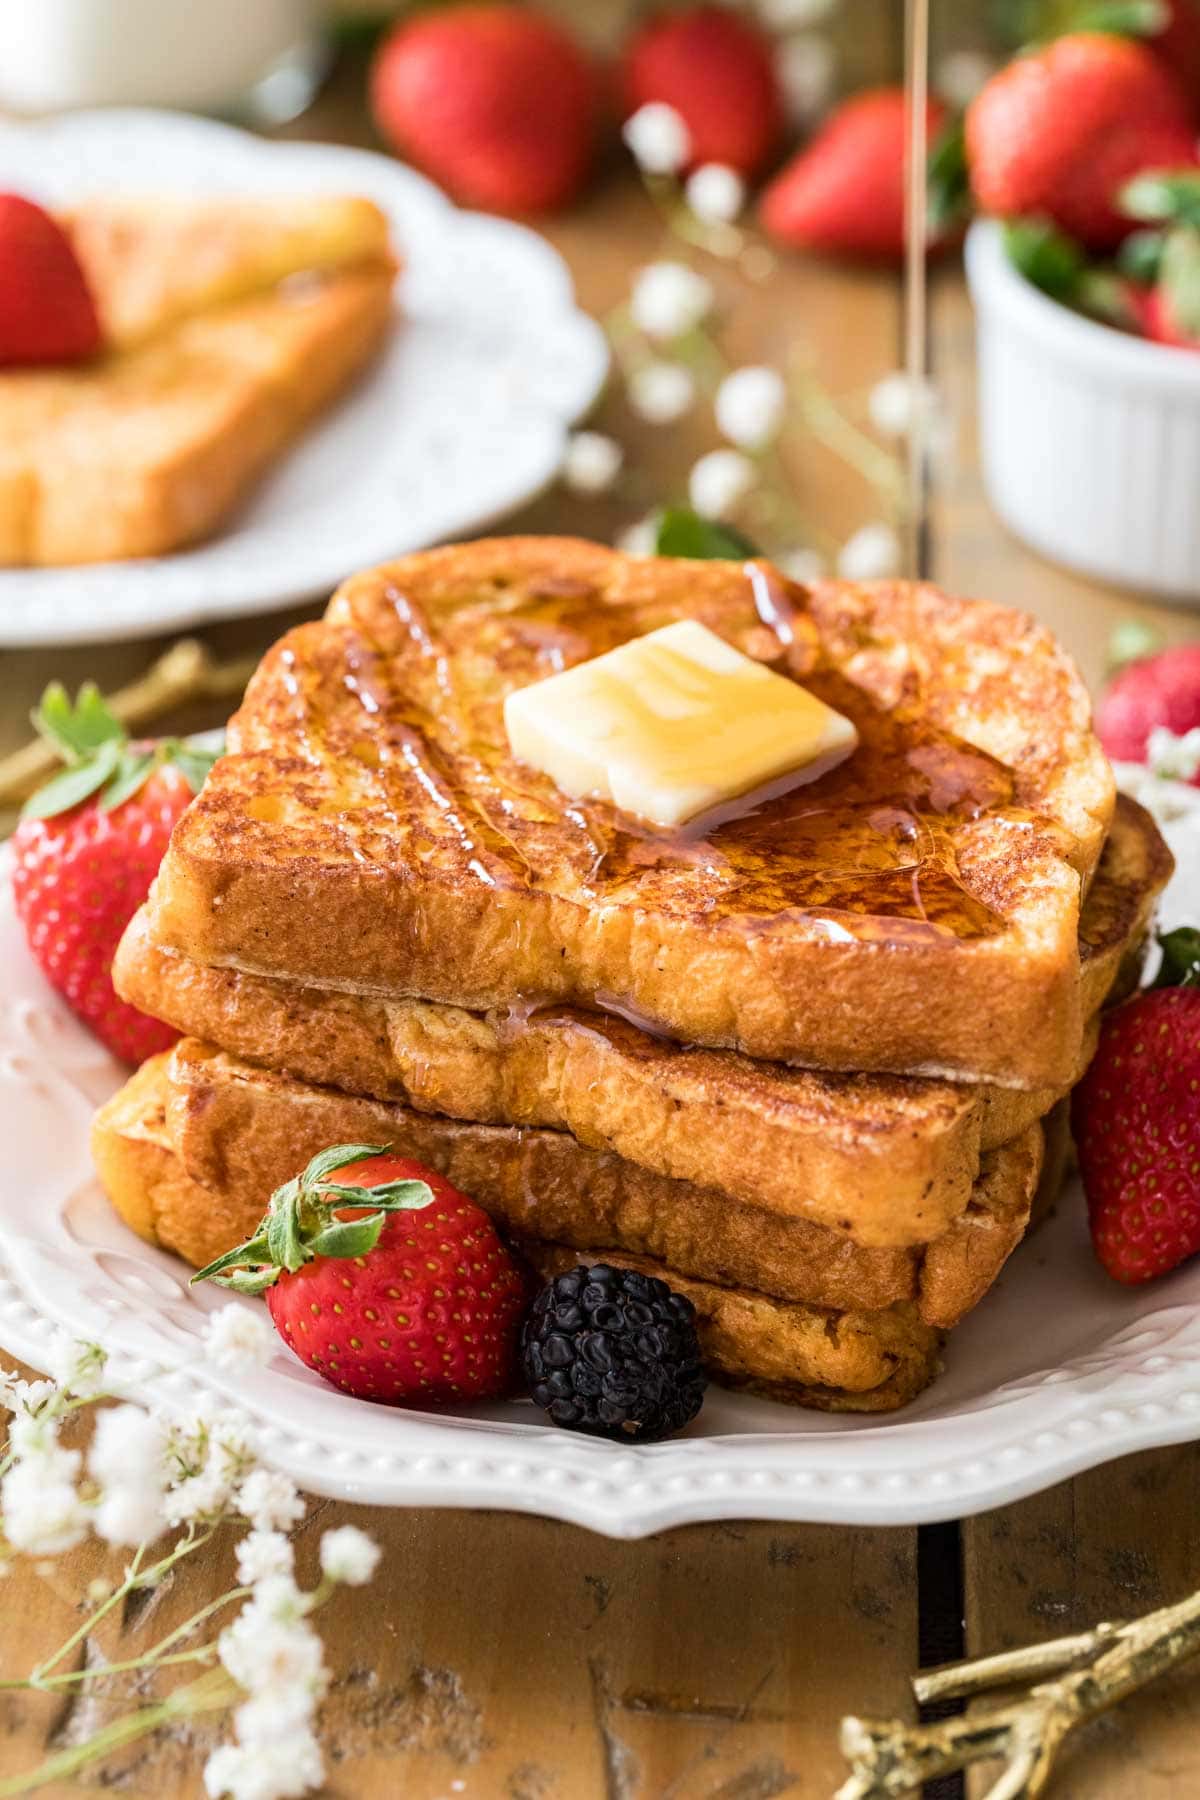 Syrup being drizzled over a stack of french toast with butter on top and berries scattered around.